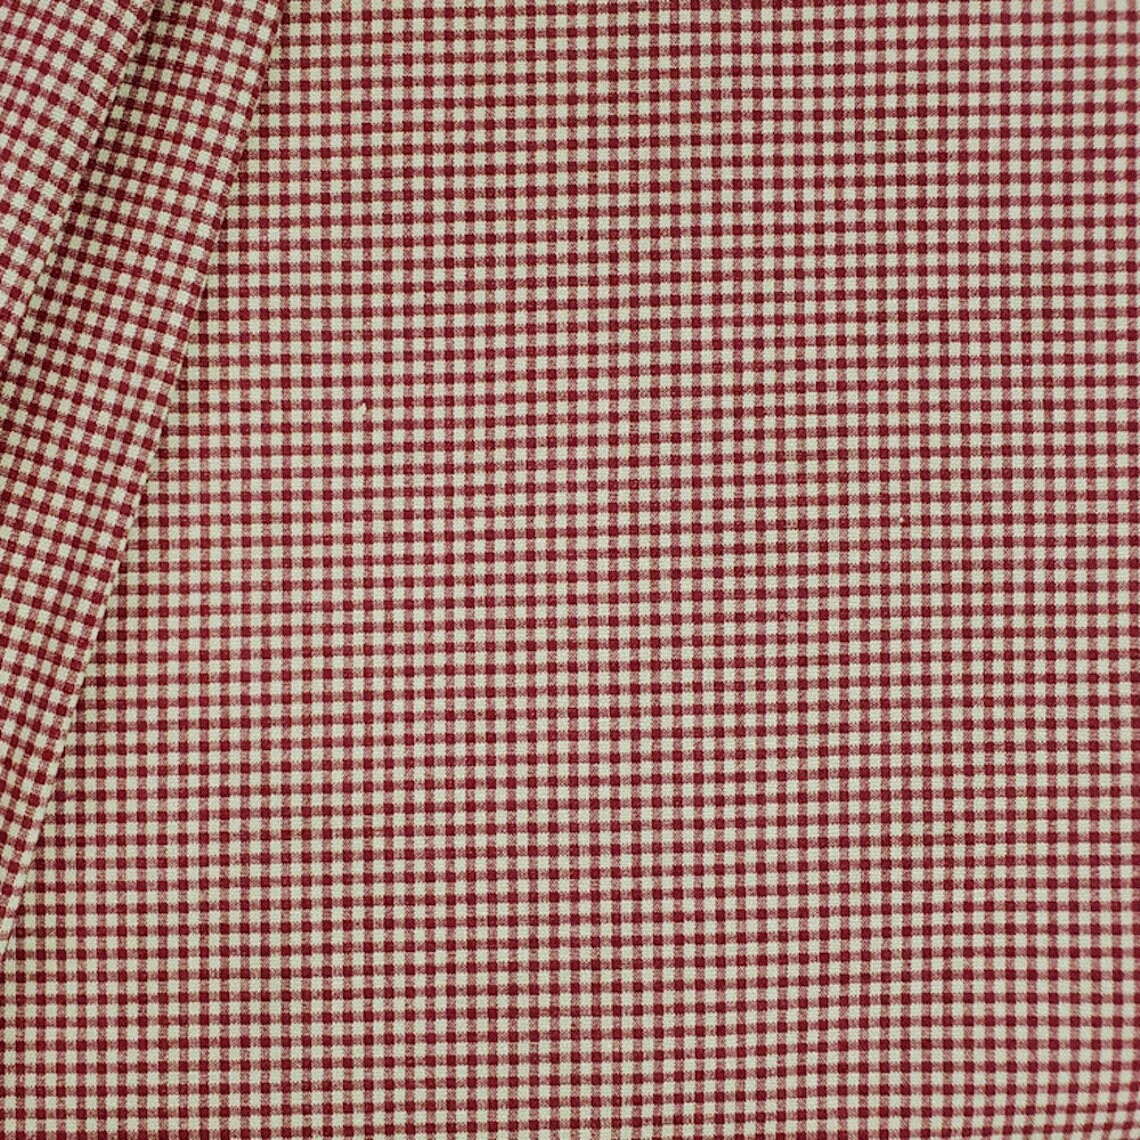 empress swag valance in farmhouse red gingham check on beige